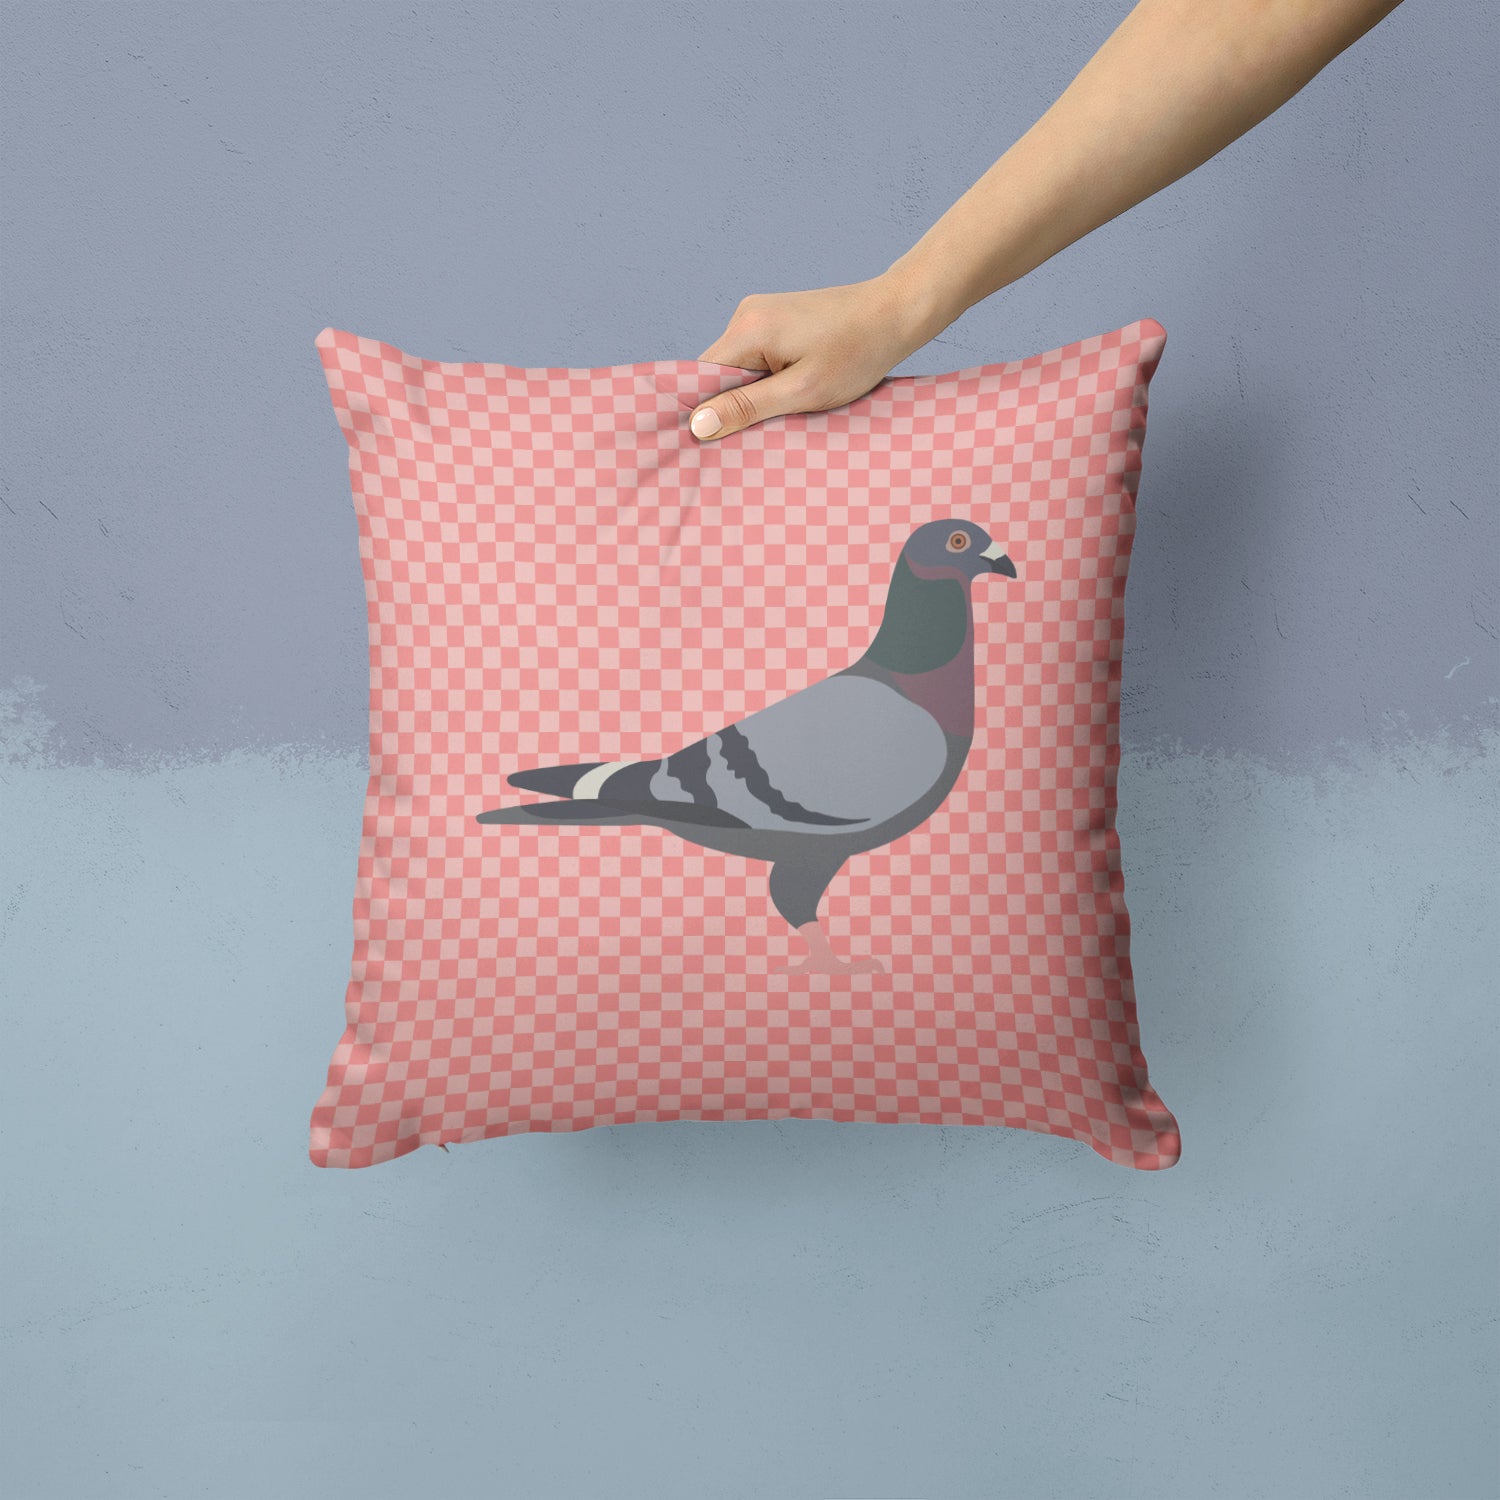 Racing Pigeon Pink Check Fabric Decorative Pillow BB7951PW1414 - the-store.com